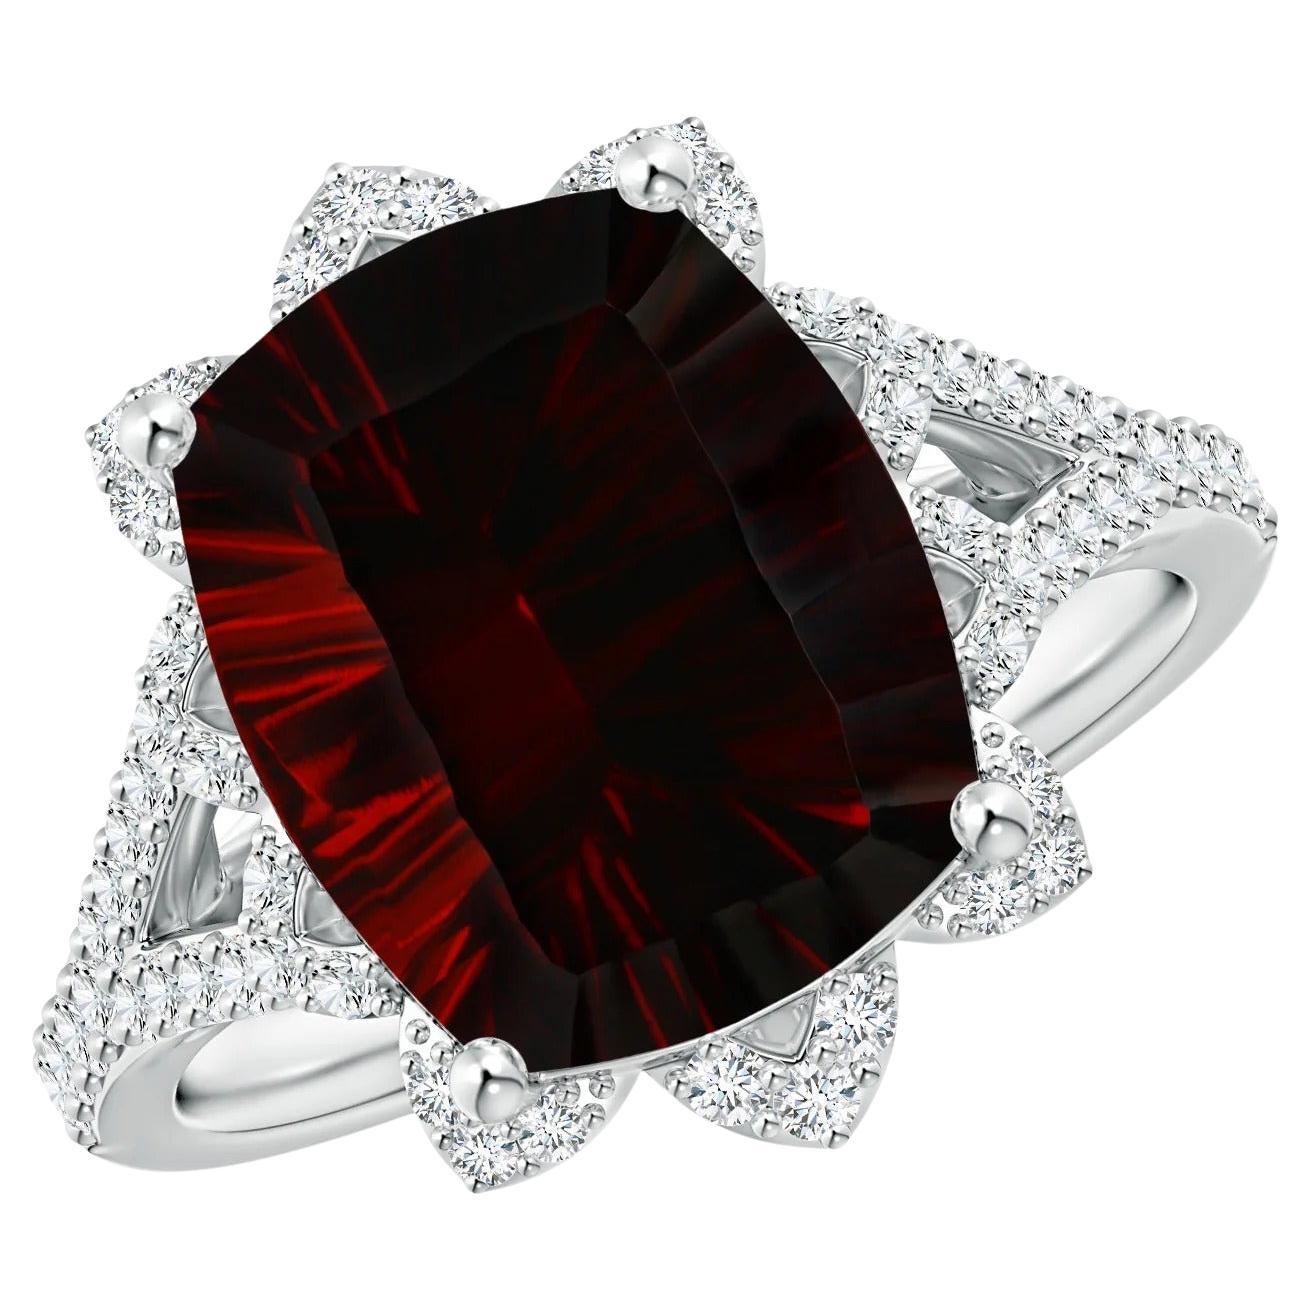 For Sale:  ANGARA Vintage Style GIA Certified Natural Garnet Floral Halo Ring in White Gold